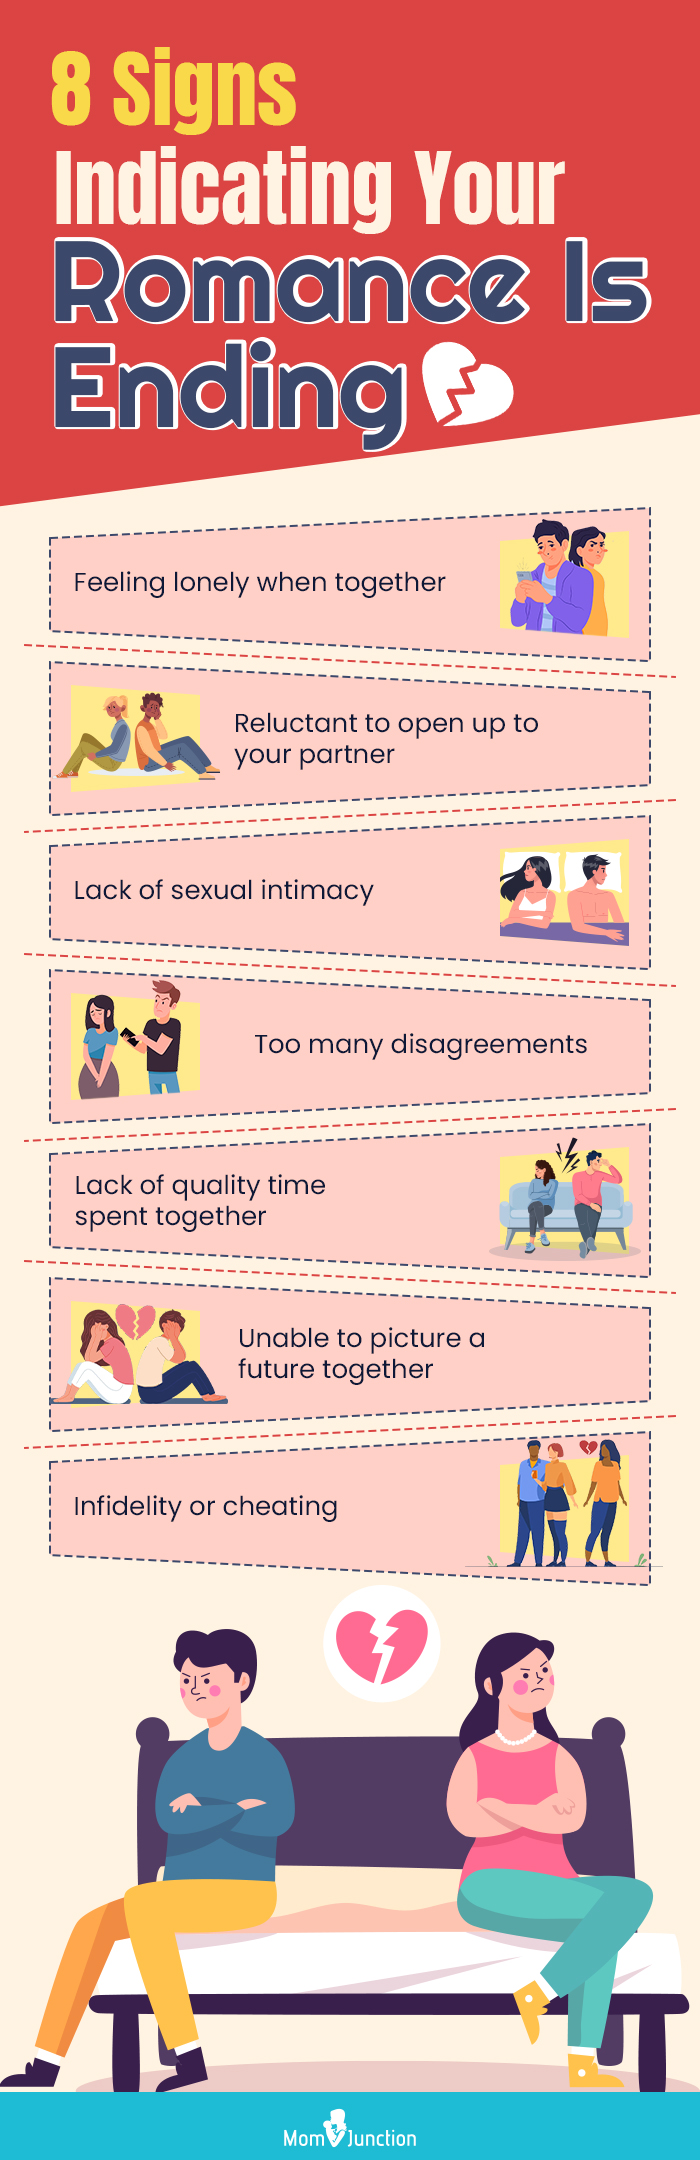 signs indicating your romance is ending(infographic)